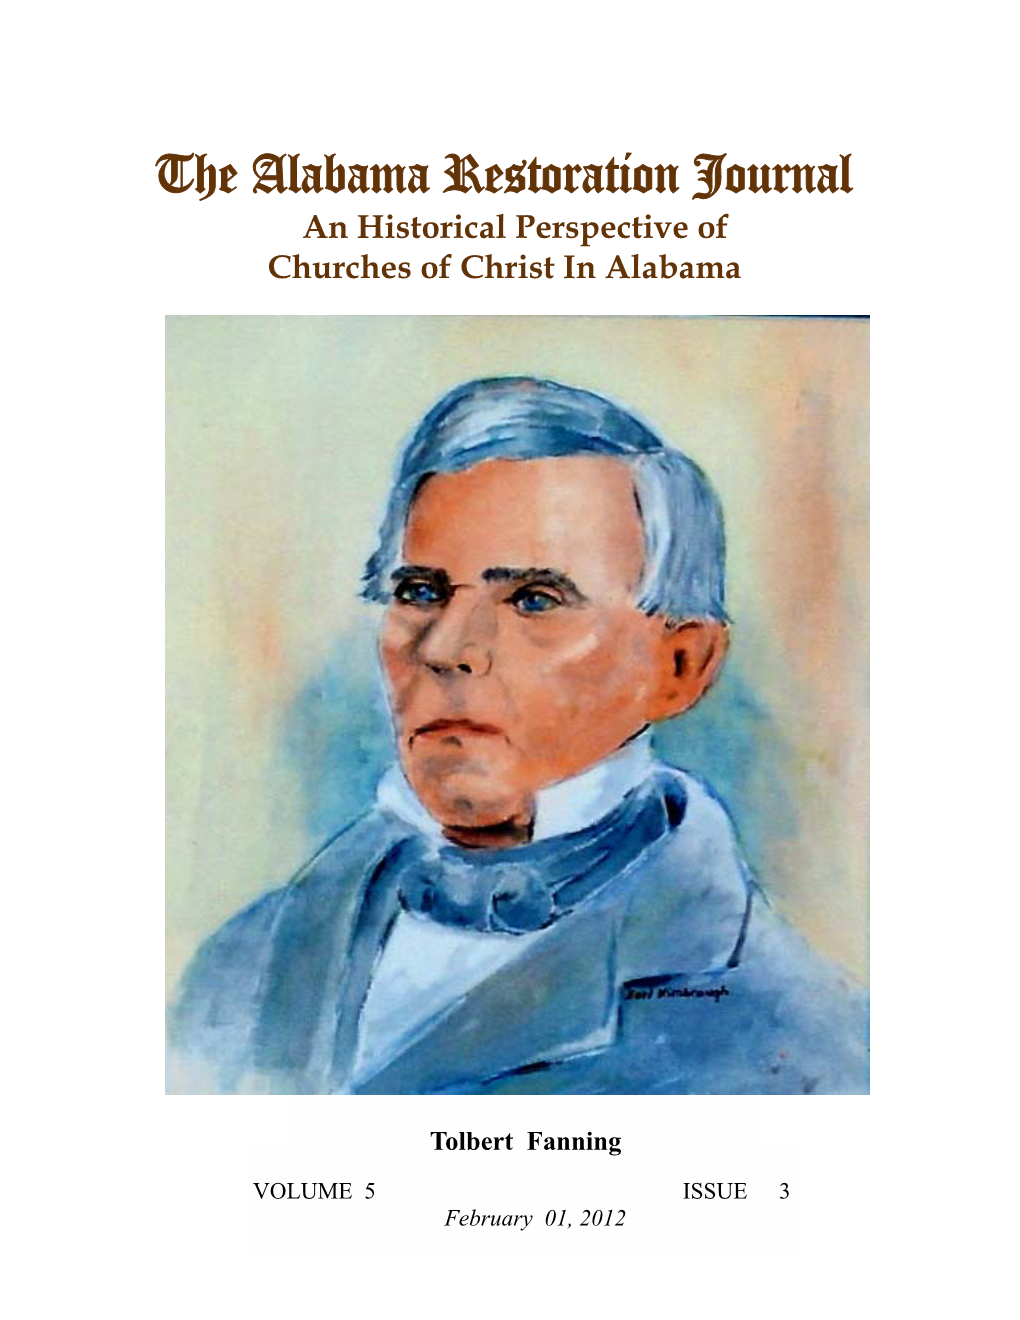 The Alabama Restoration Journal an Historical Perspective of Churches of Christ in Alabama